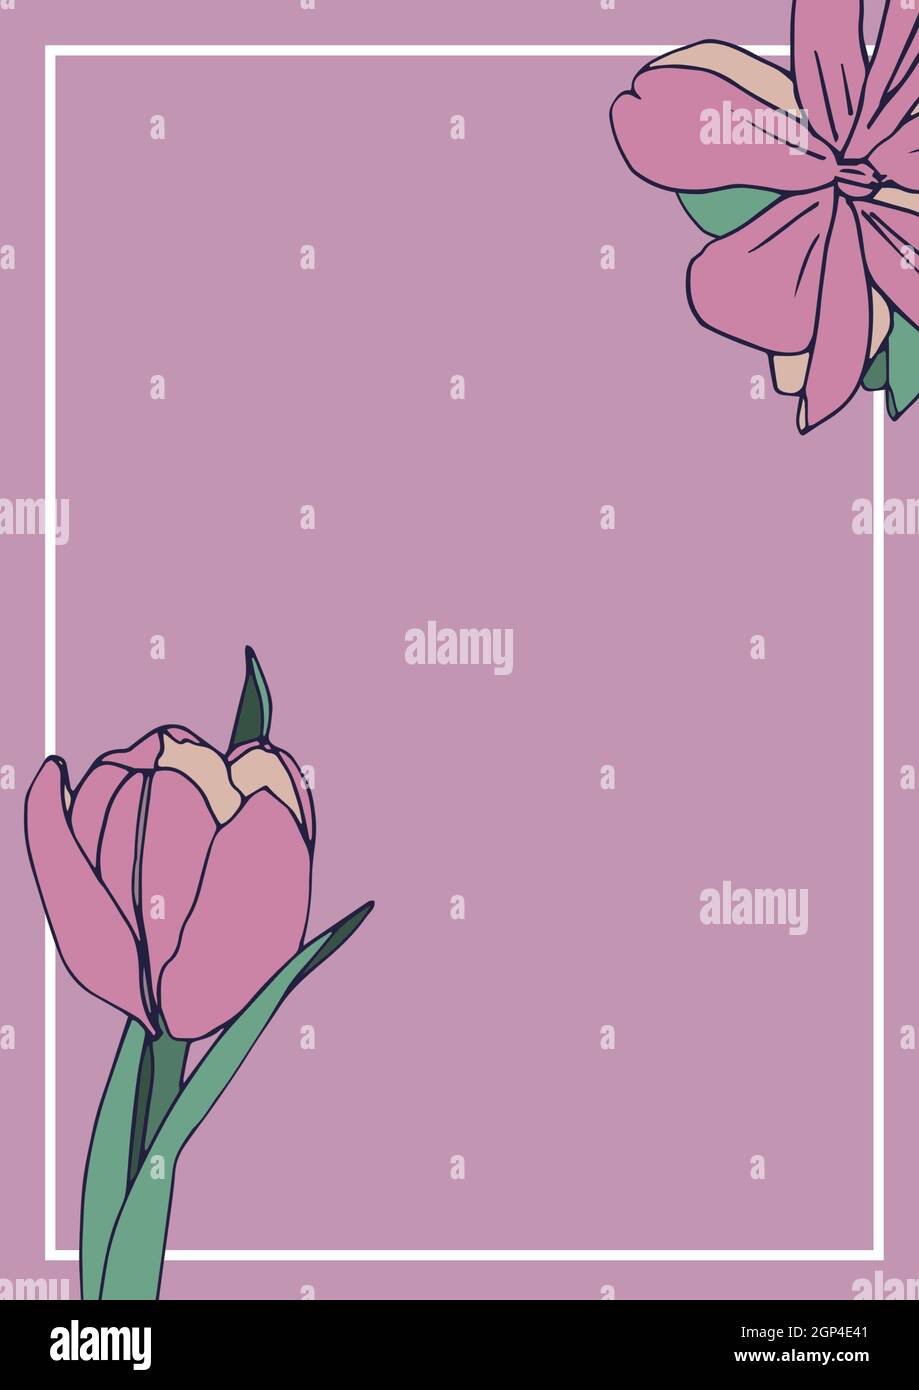 Composition of pink flower icons on pink background Stock Photo